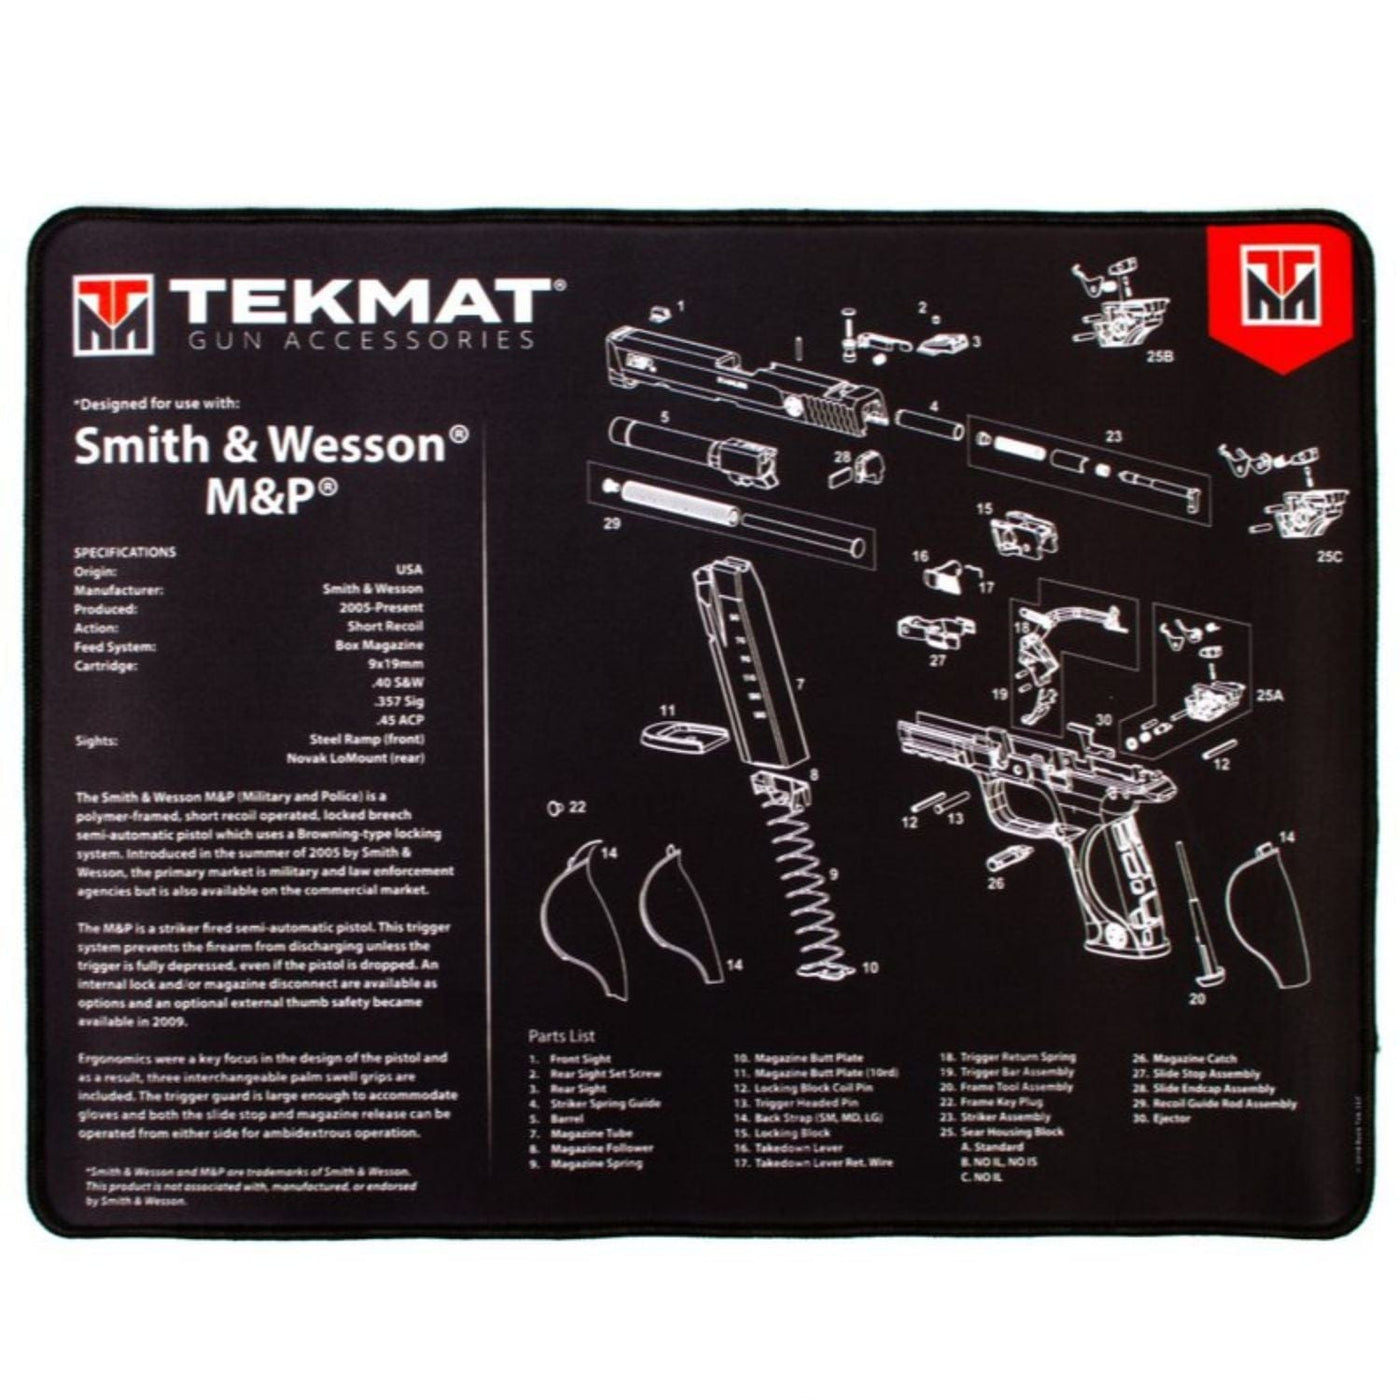 TekMat TekMat Ultra 20 Smith and Wesson MP Gun Cleaning Mat Shooting